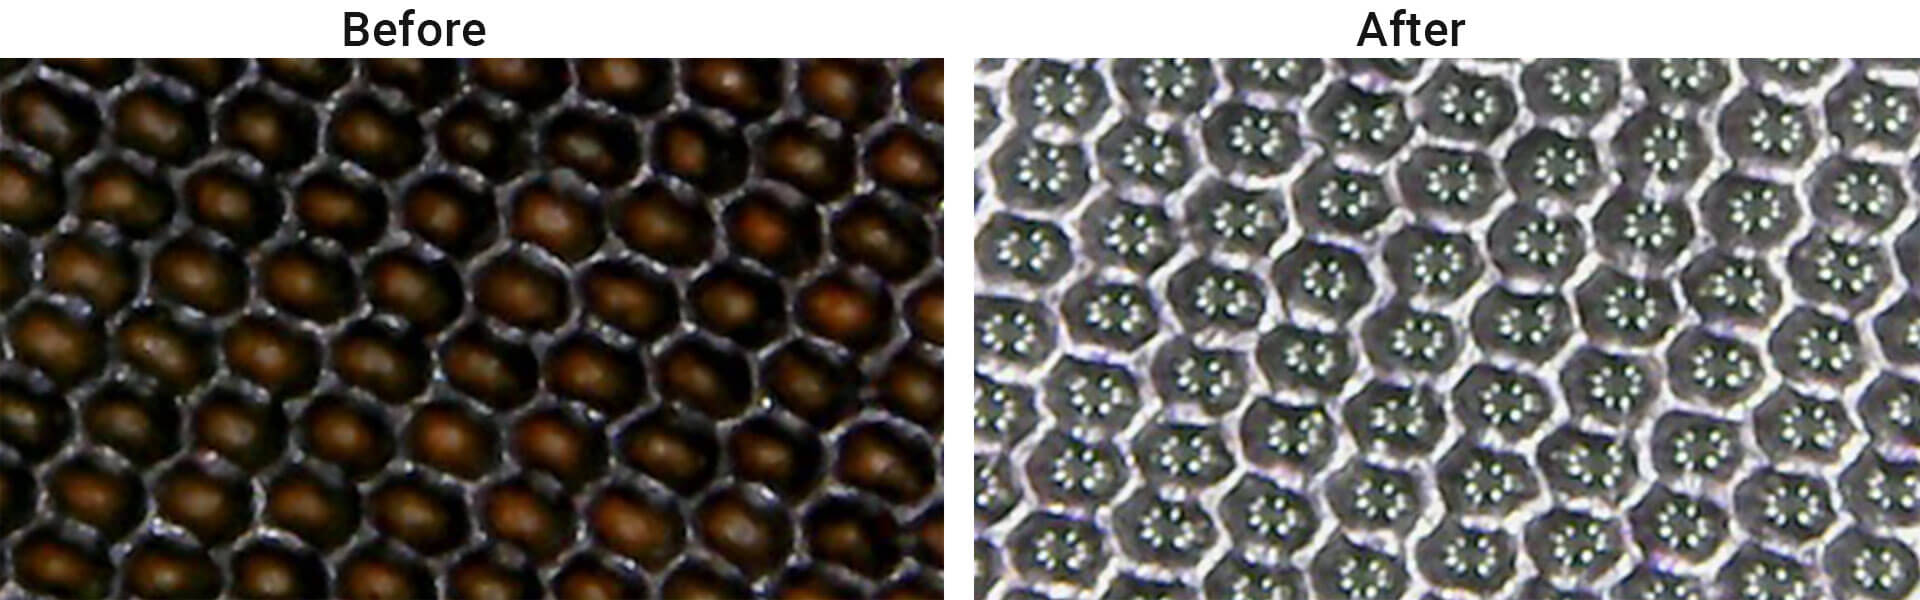 anilox roll cells before and after Evolution Bioclean cleaning